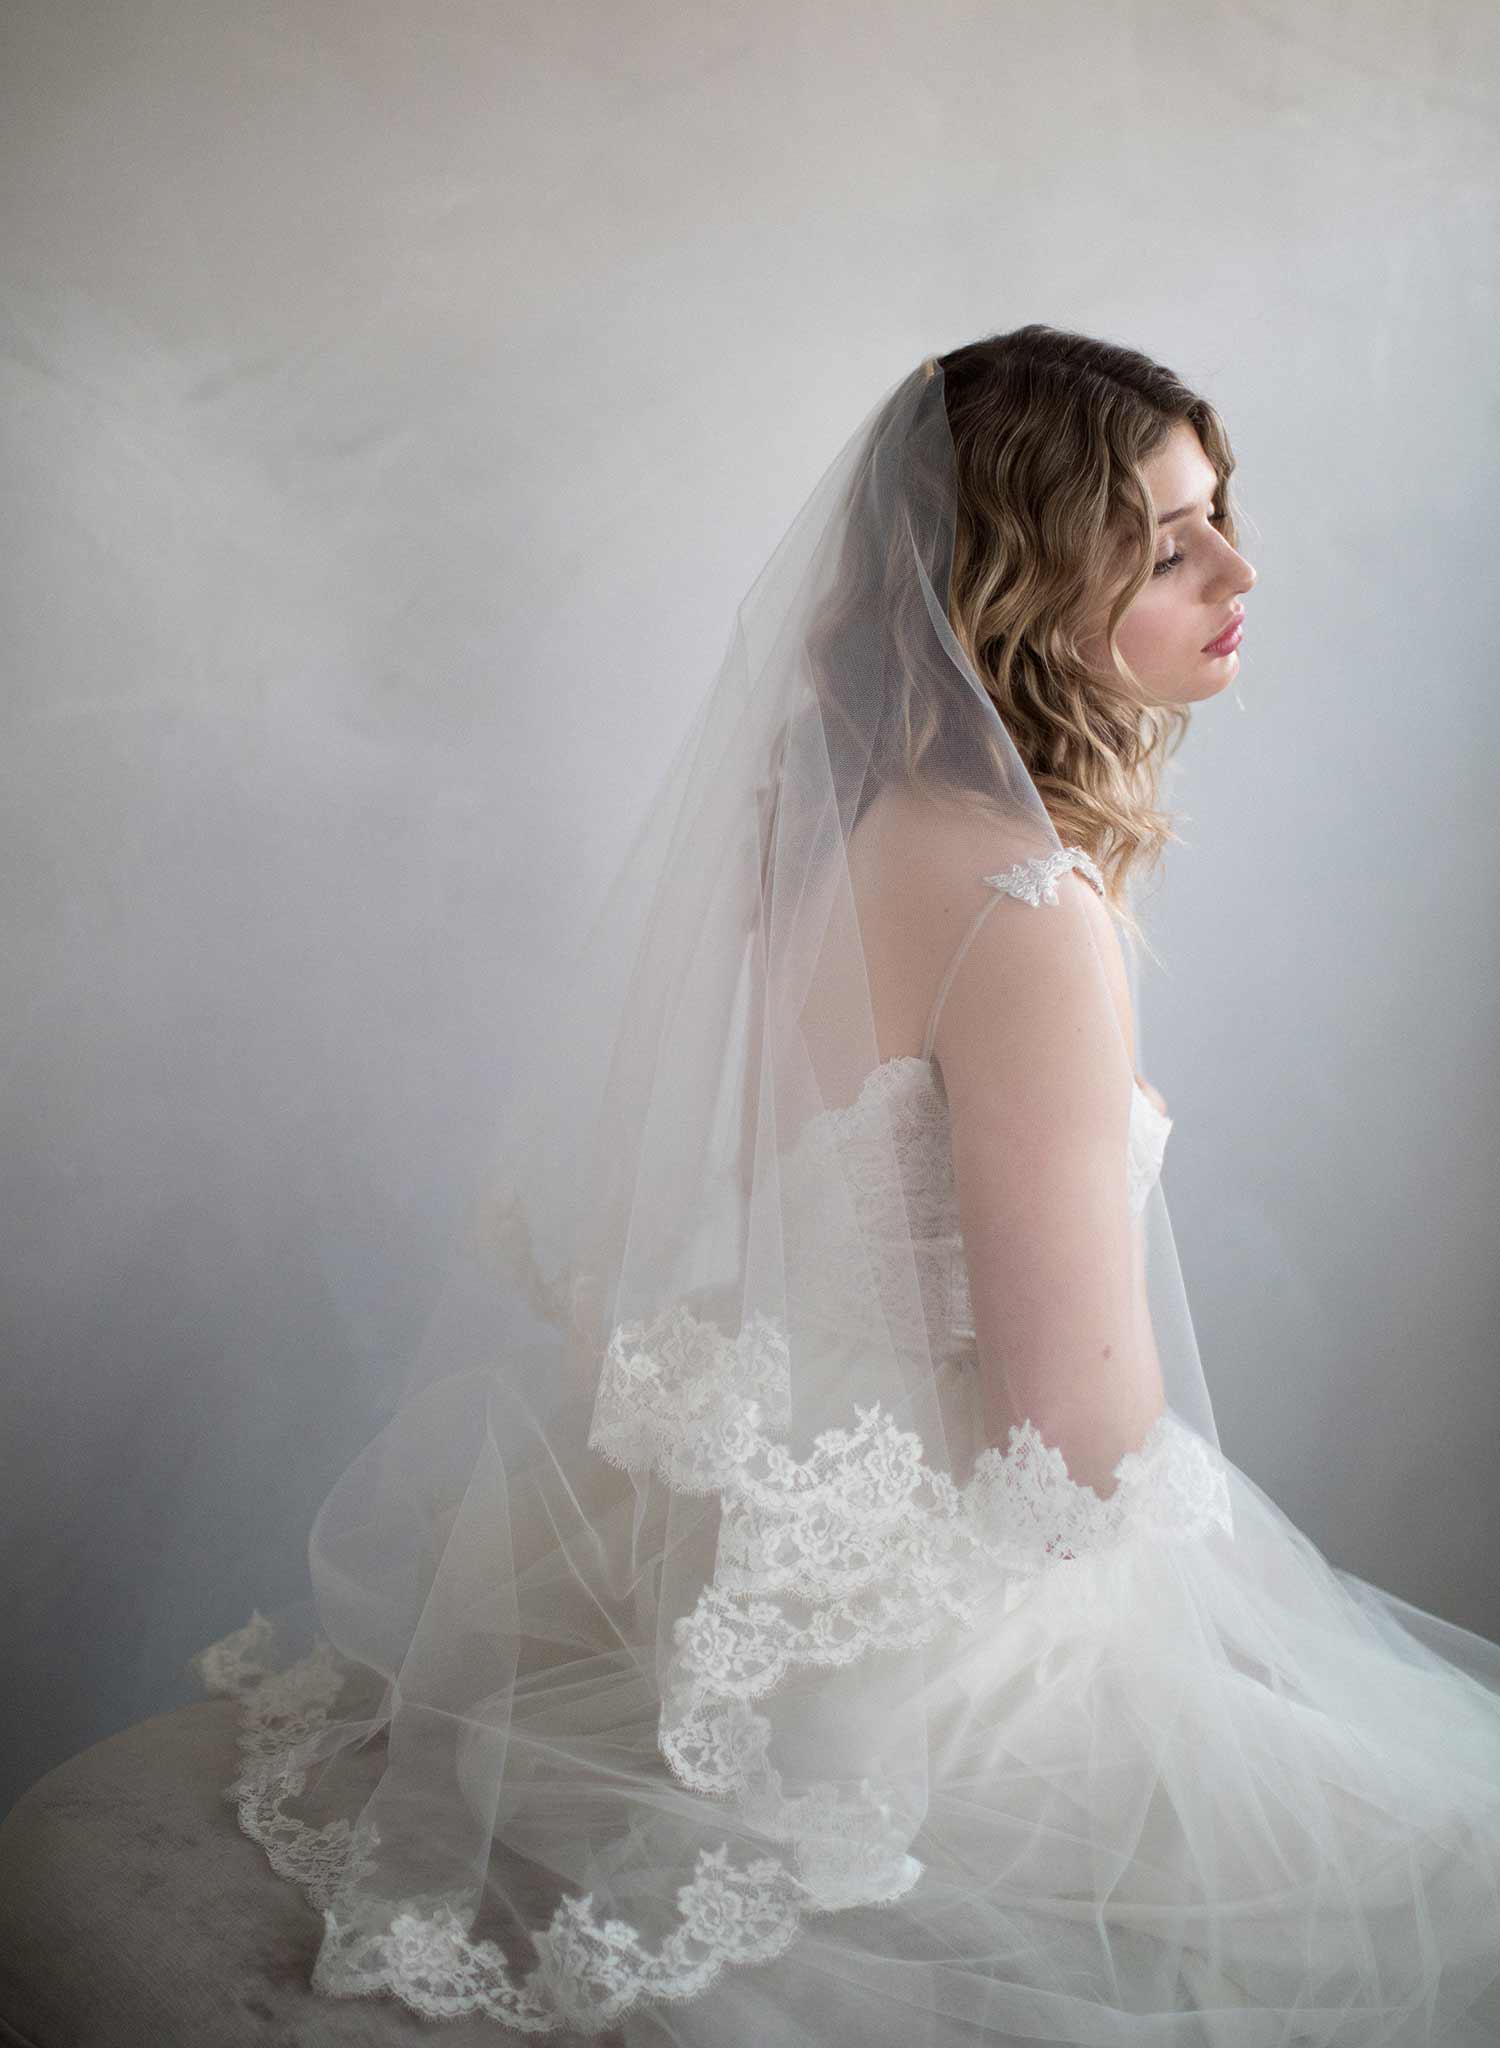 Dramatic Black Lace and Tulle Bridal Veil